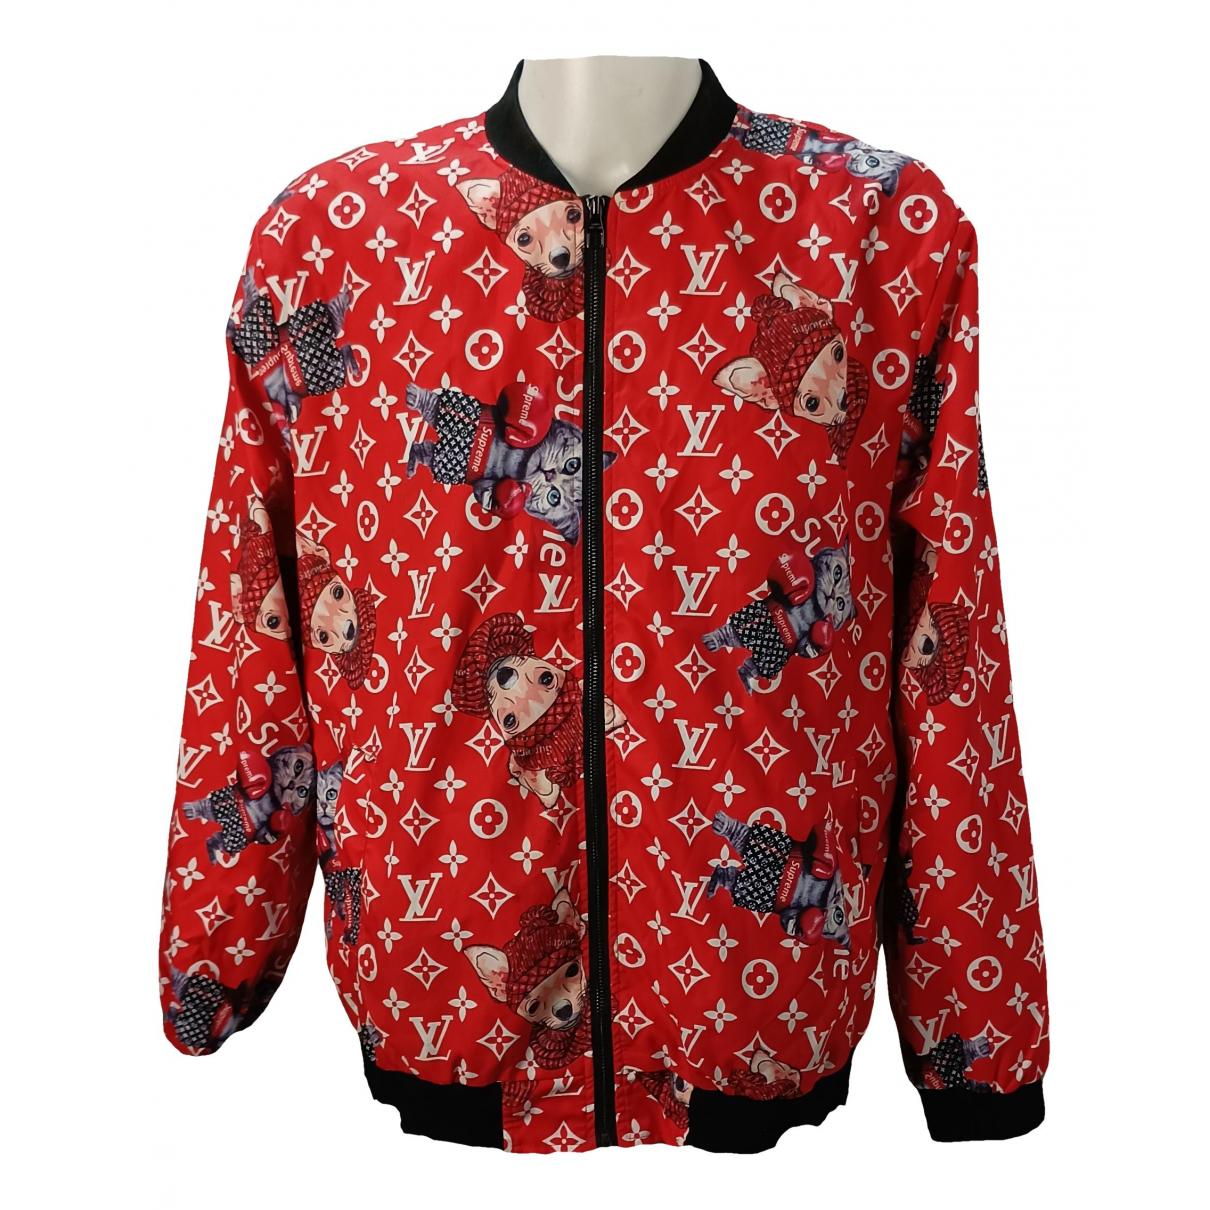 Louis Vuitton Men's Jacket  Buy or Sell your LV jackets - Vestiaire  Collective